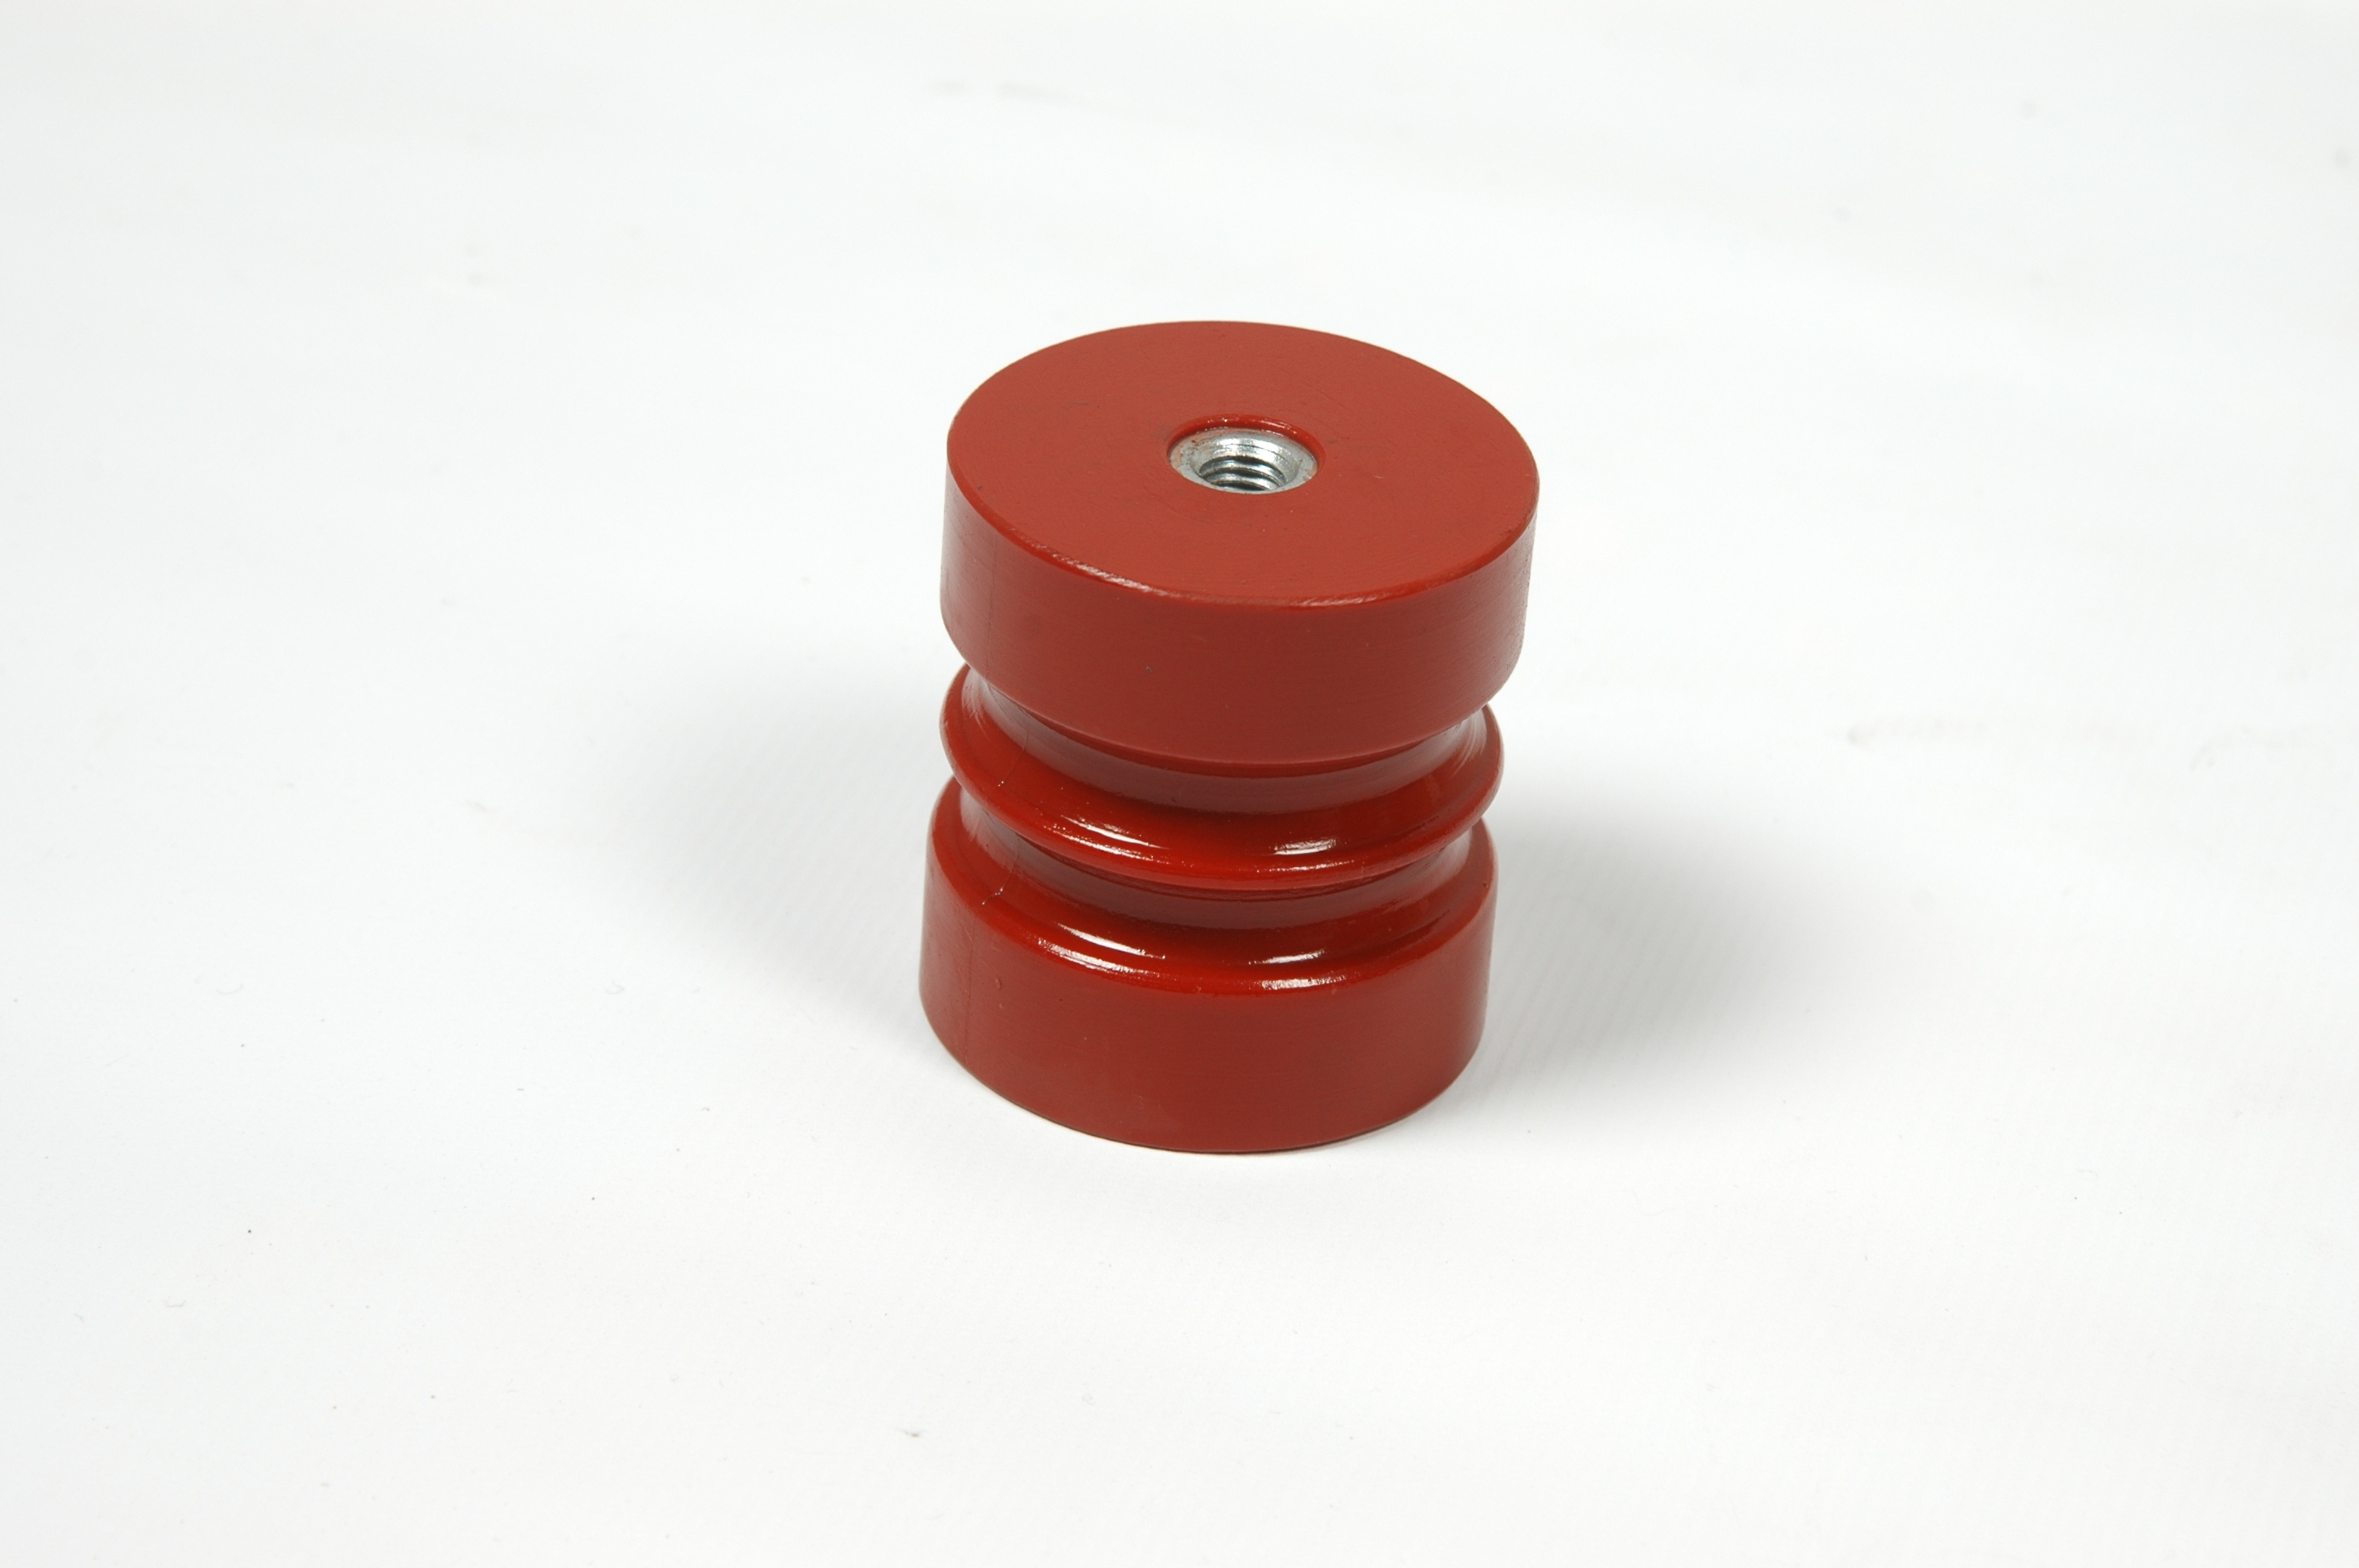 Disc 2.2kv Epoxy Insulator, for Control Panels, Feature : Four Times Stronger, Sturdy Construction